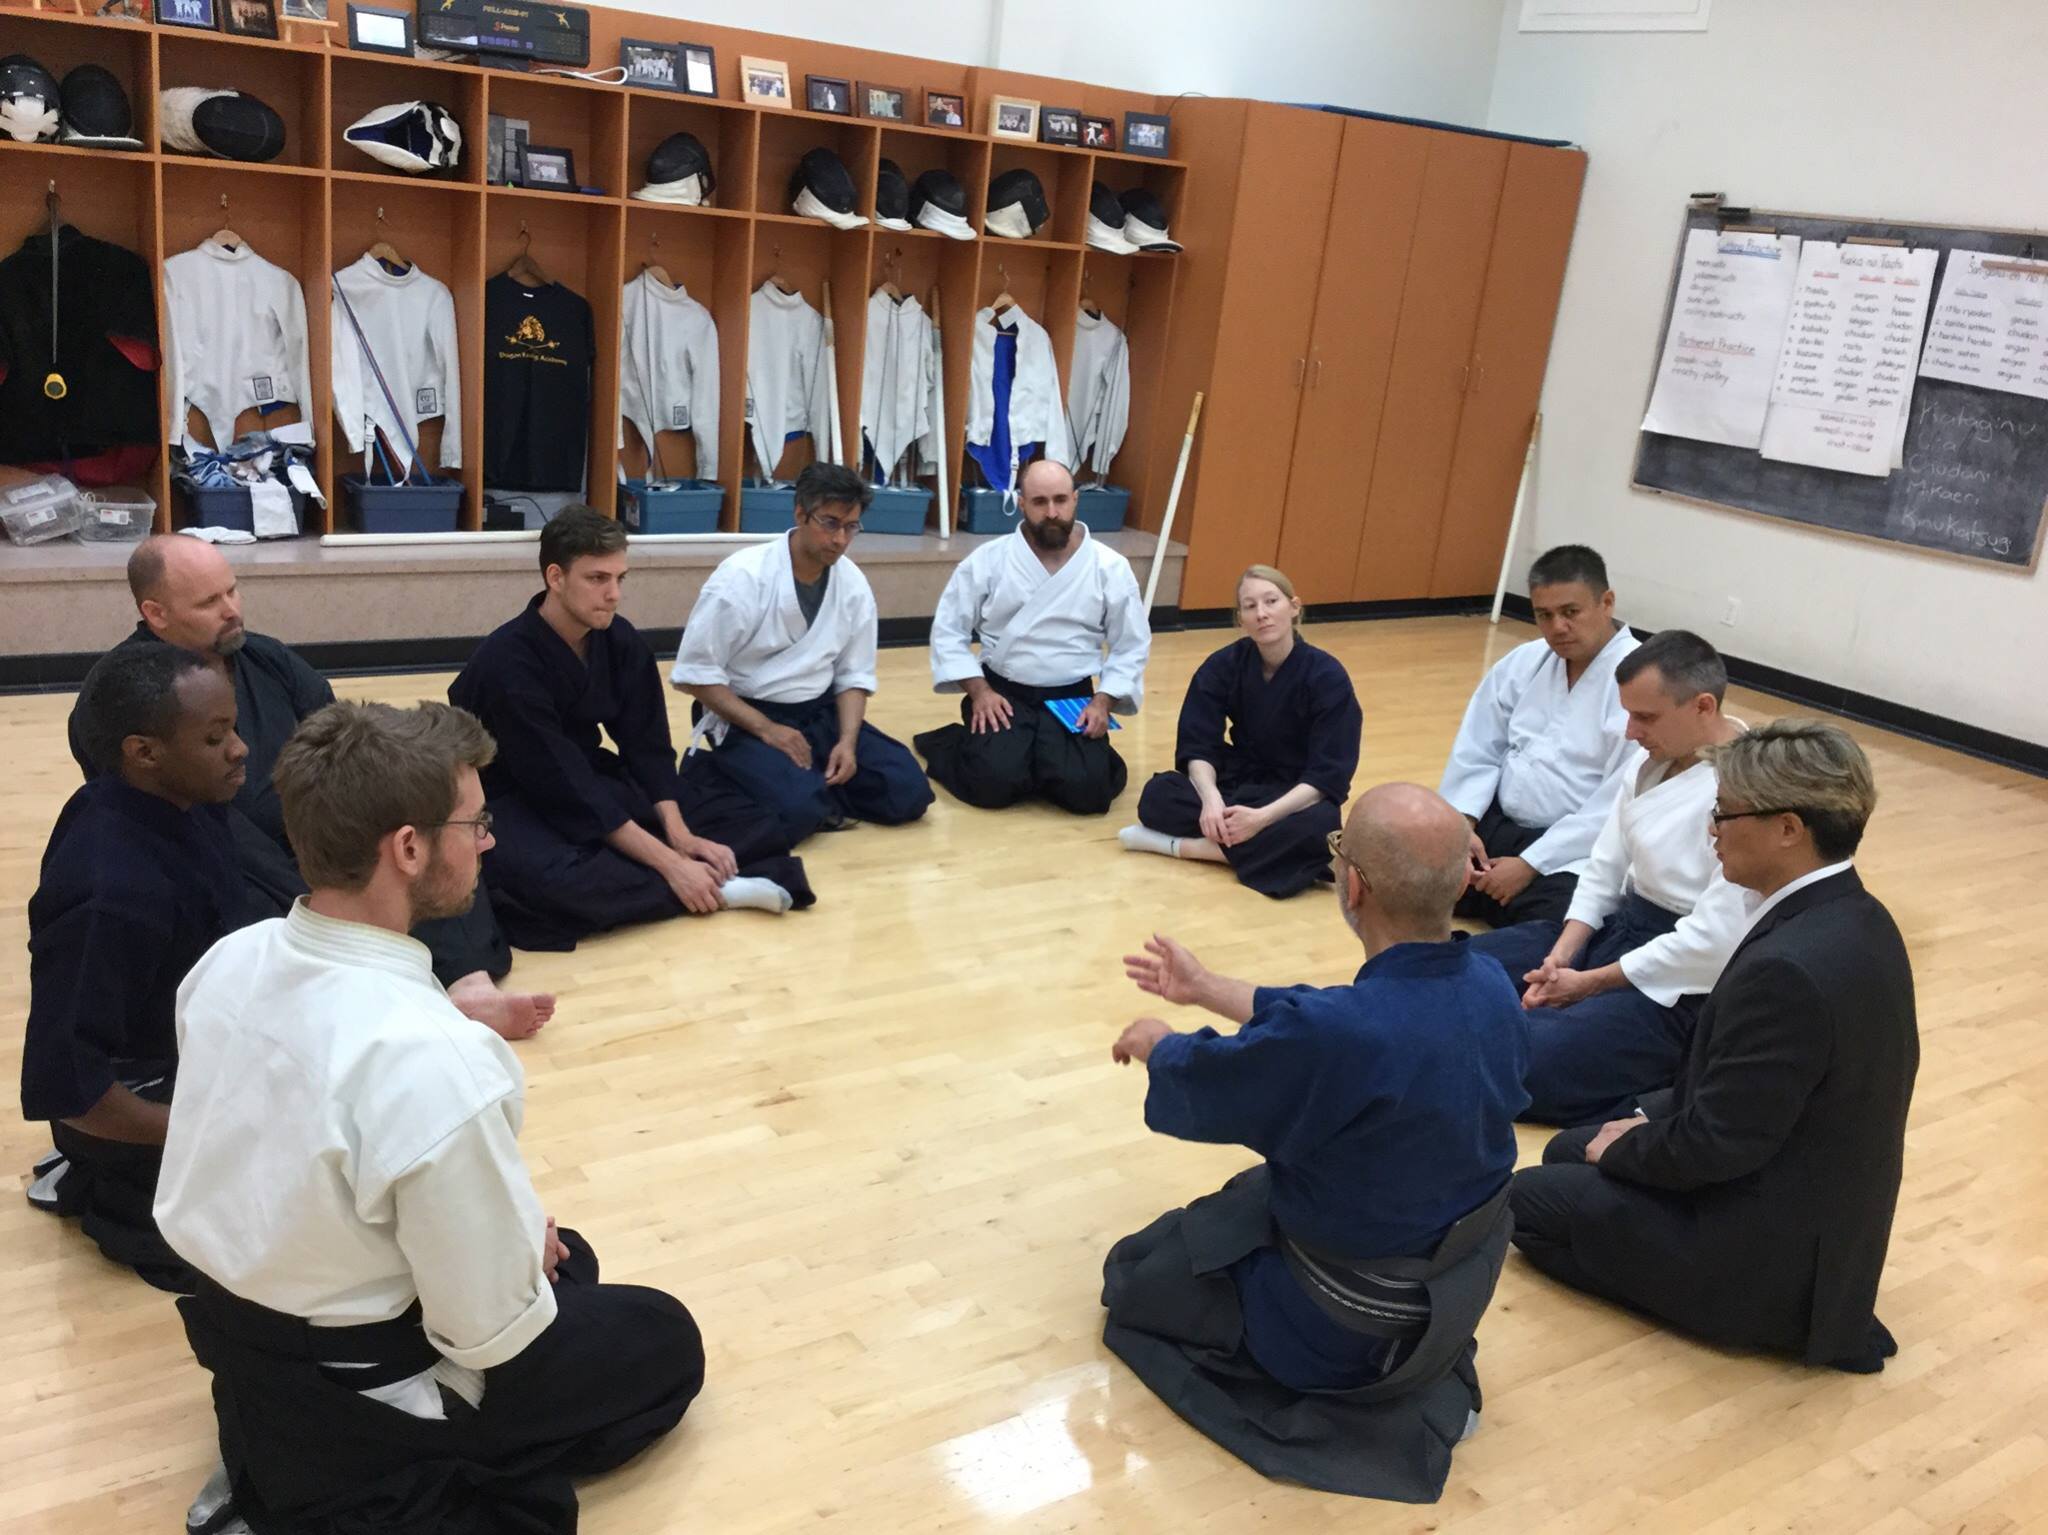 Post-seminar discussion on Yagyu philosophy